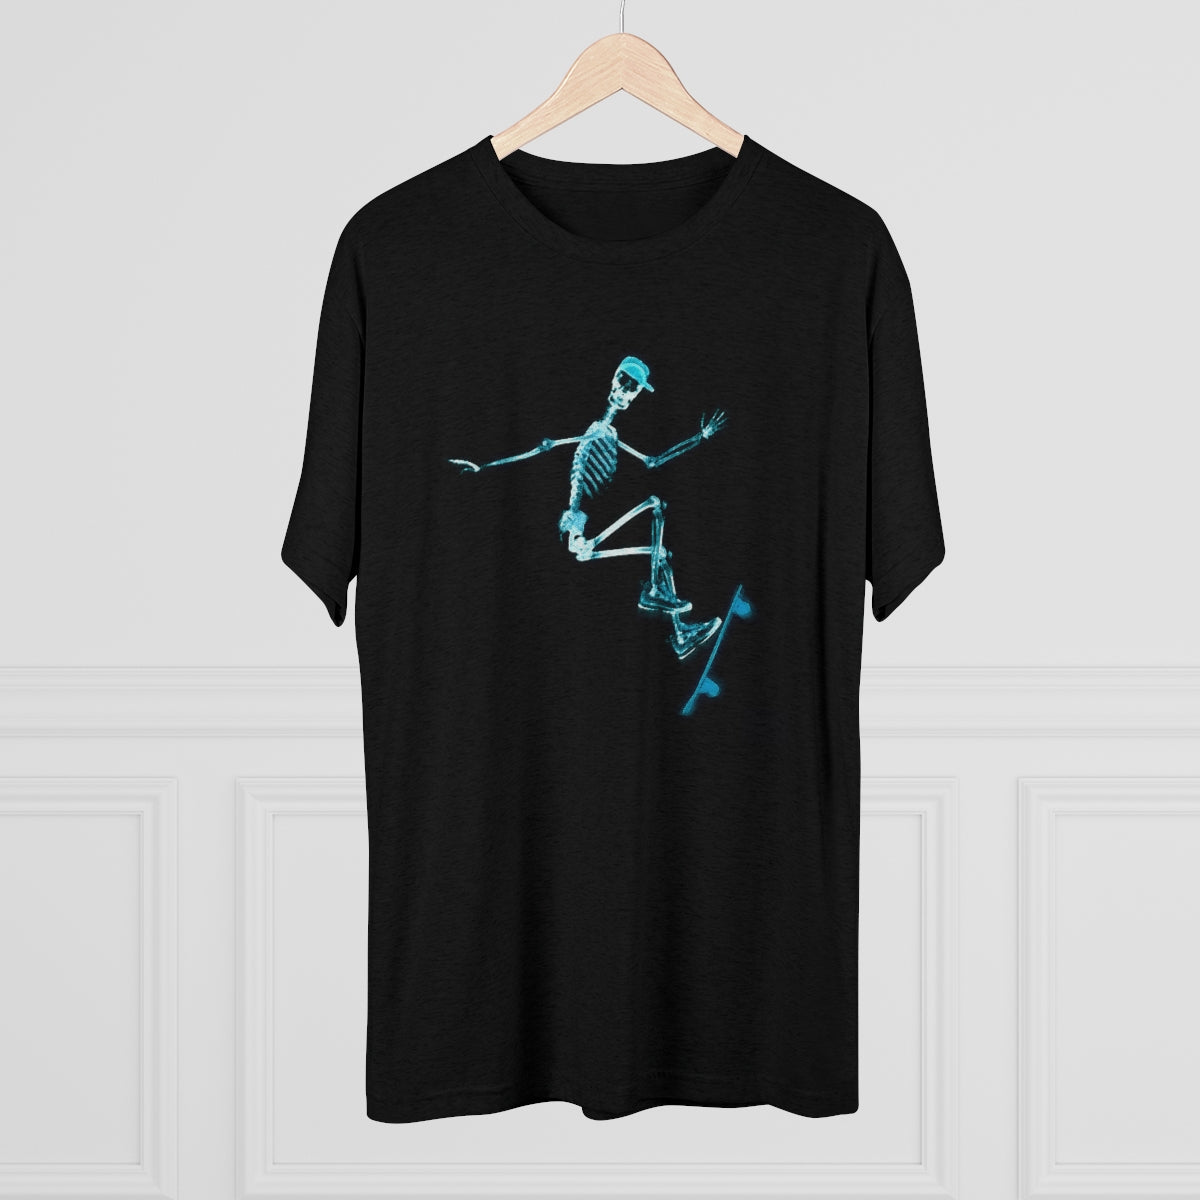 Special Collection – X-Ray: Ollie – Unisex Tri-Blend Crew Tee